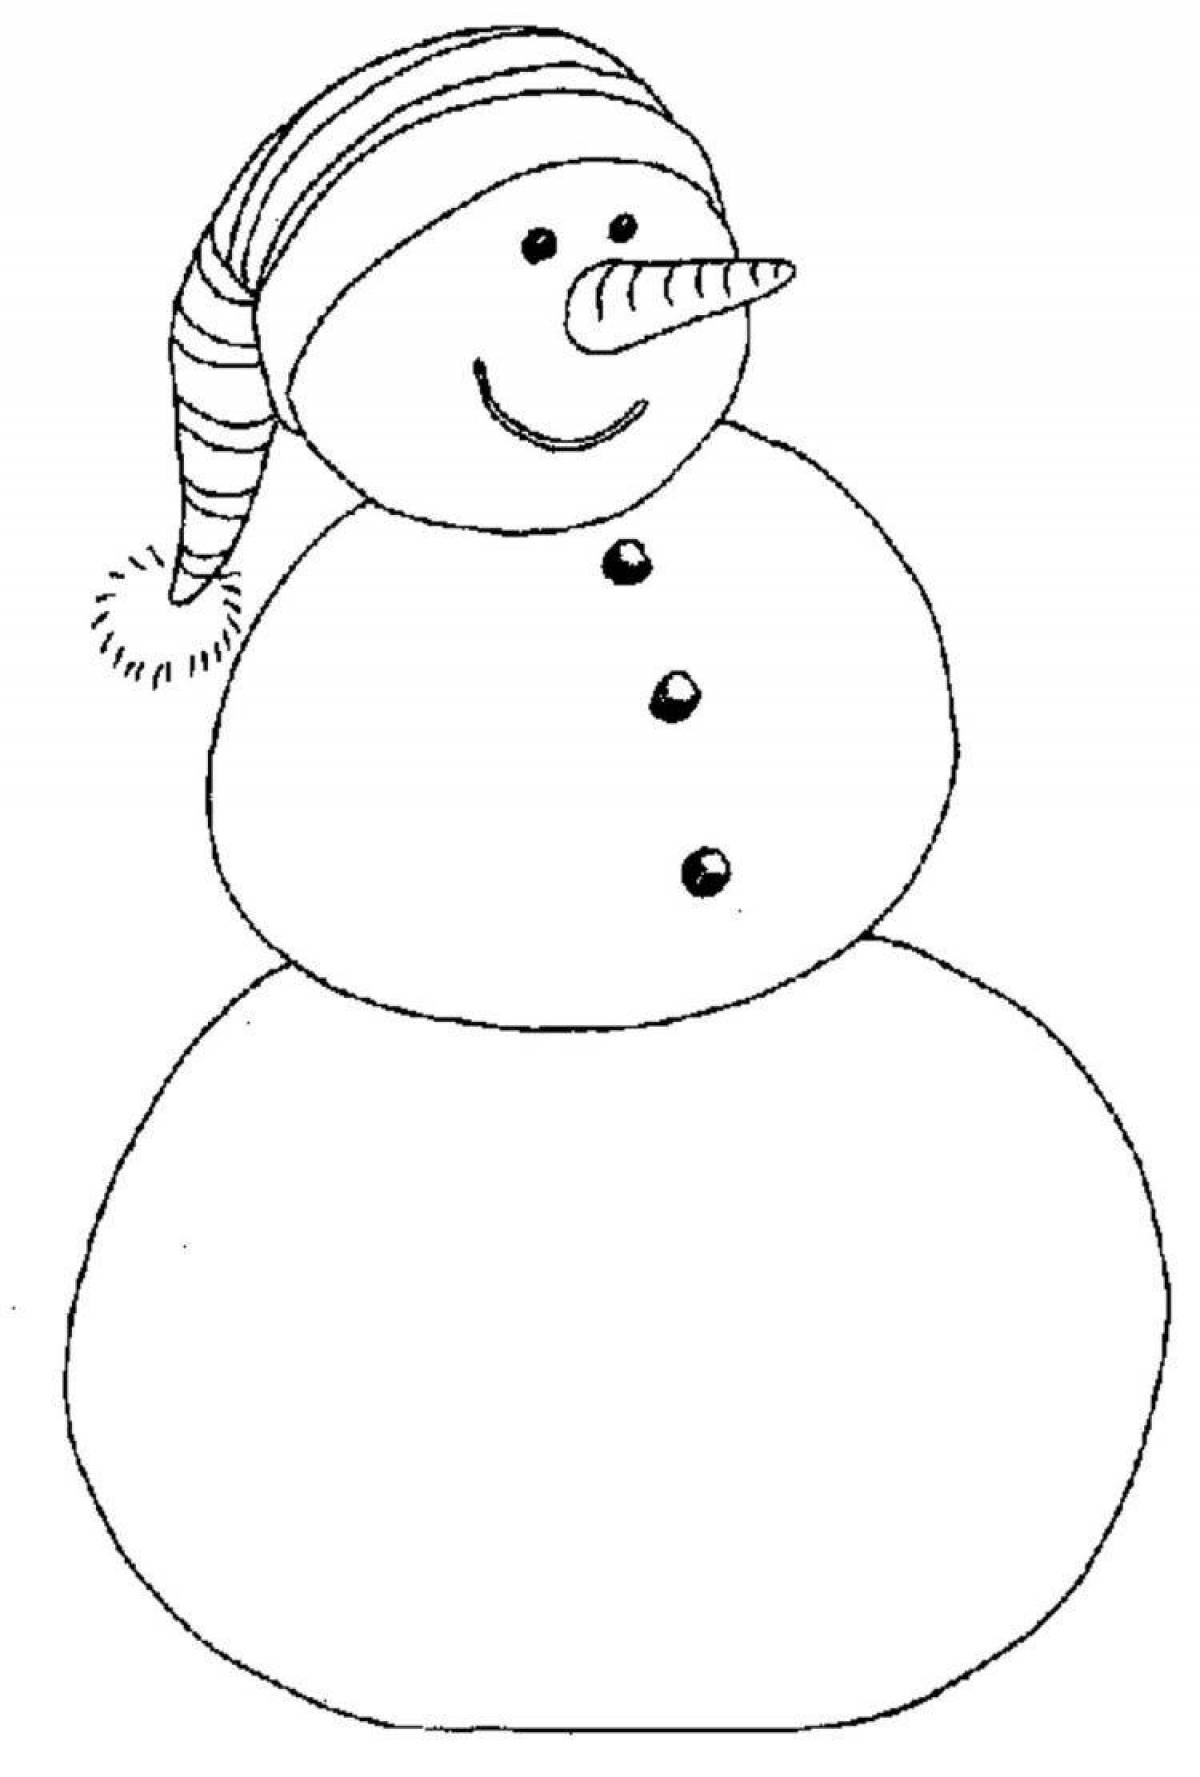 Adorable snowman coloring book for kids 4-5 years old